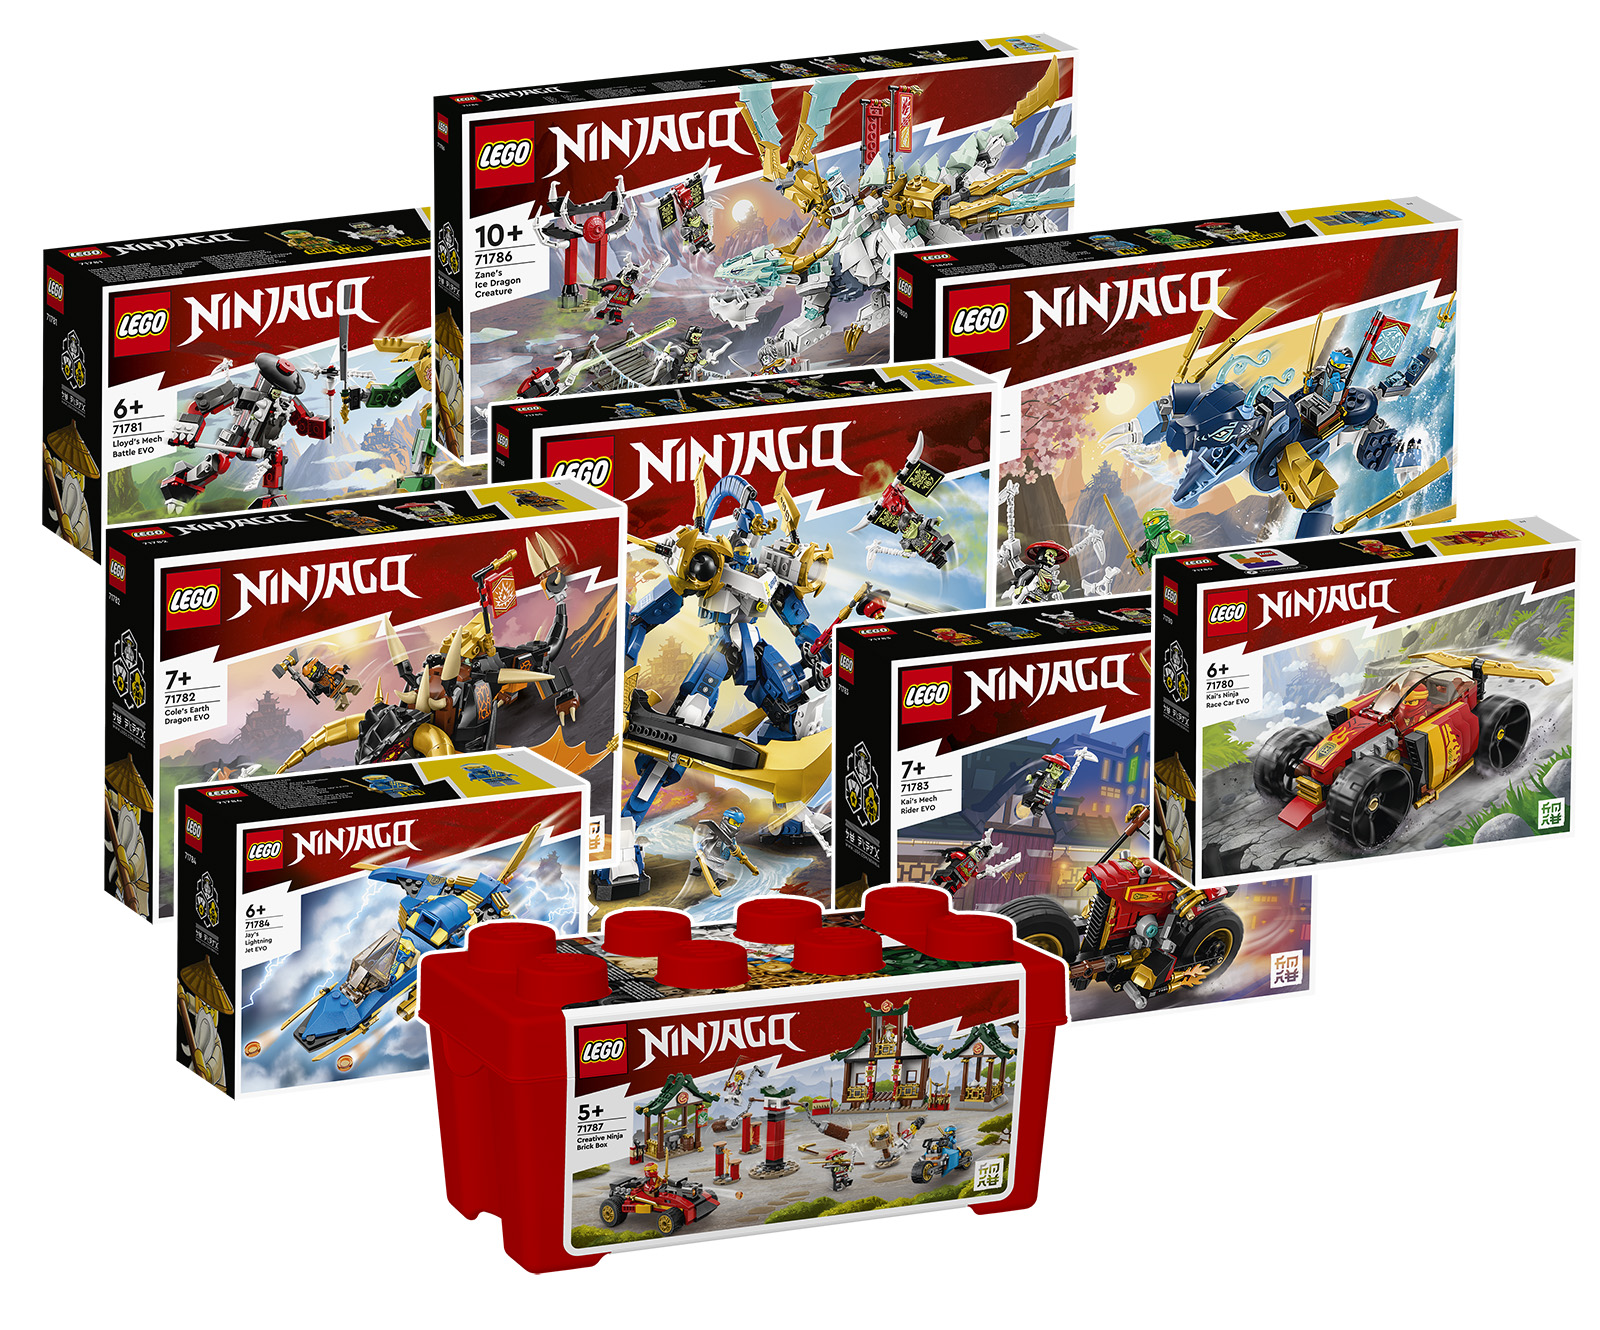 Five things you didn't know about the LEGO NINJAGO 2023 sets